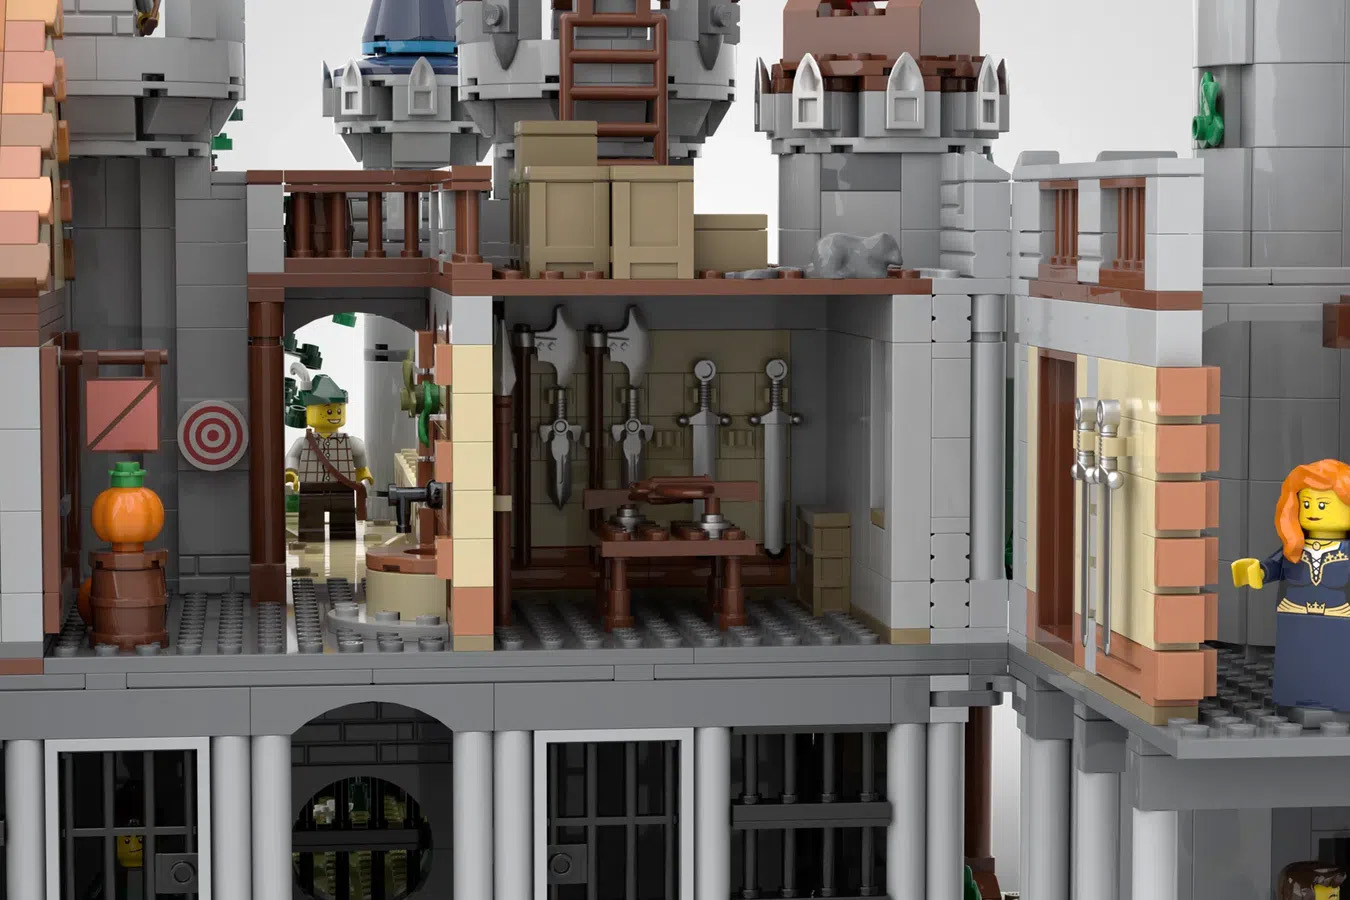 THE MEDIEVAL FORTRESS Achieves 10K Support on LEGO IDEAS